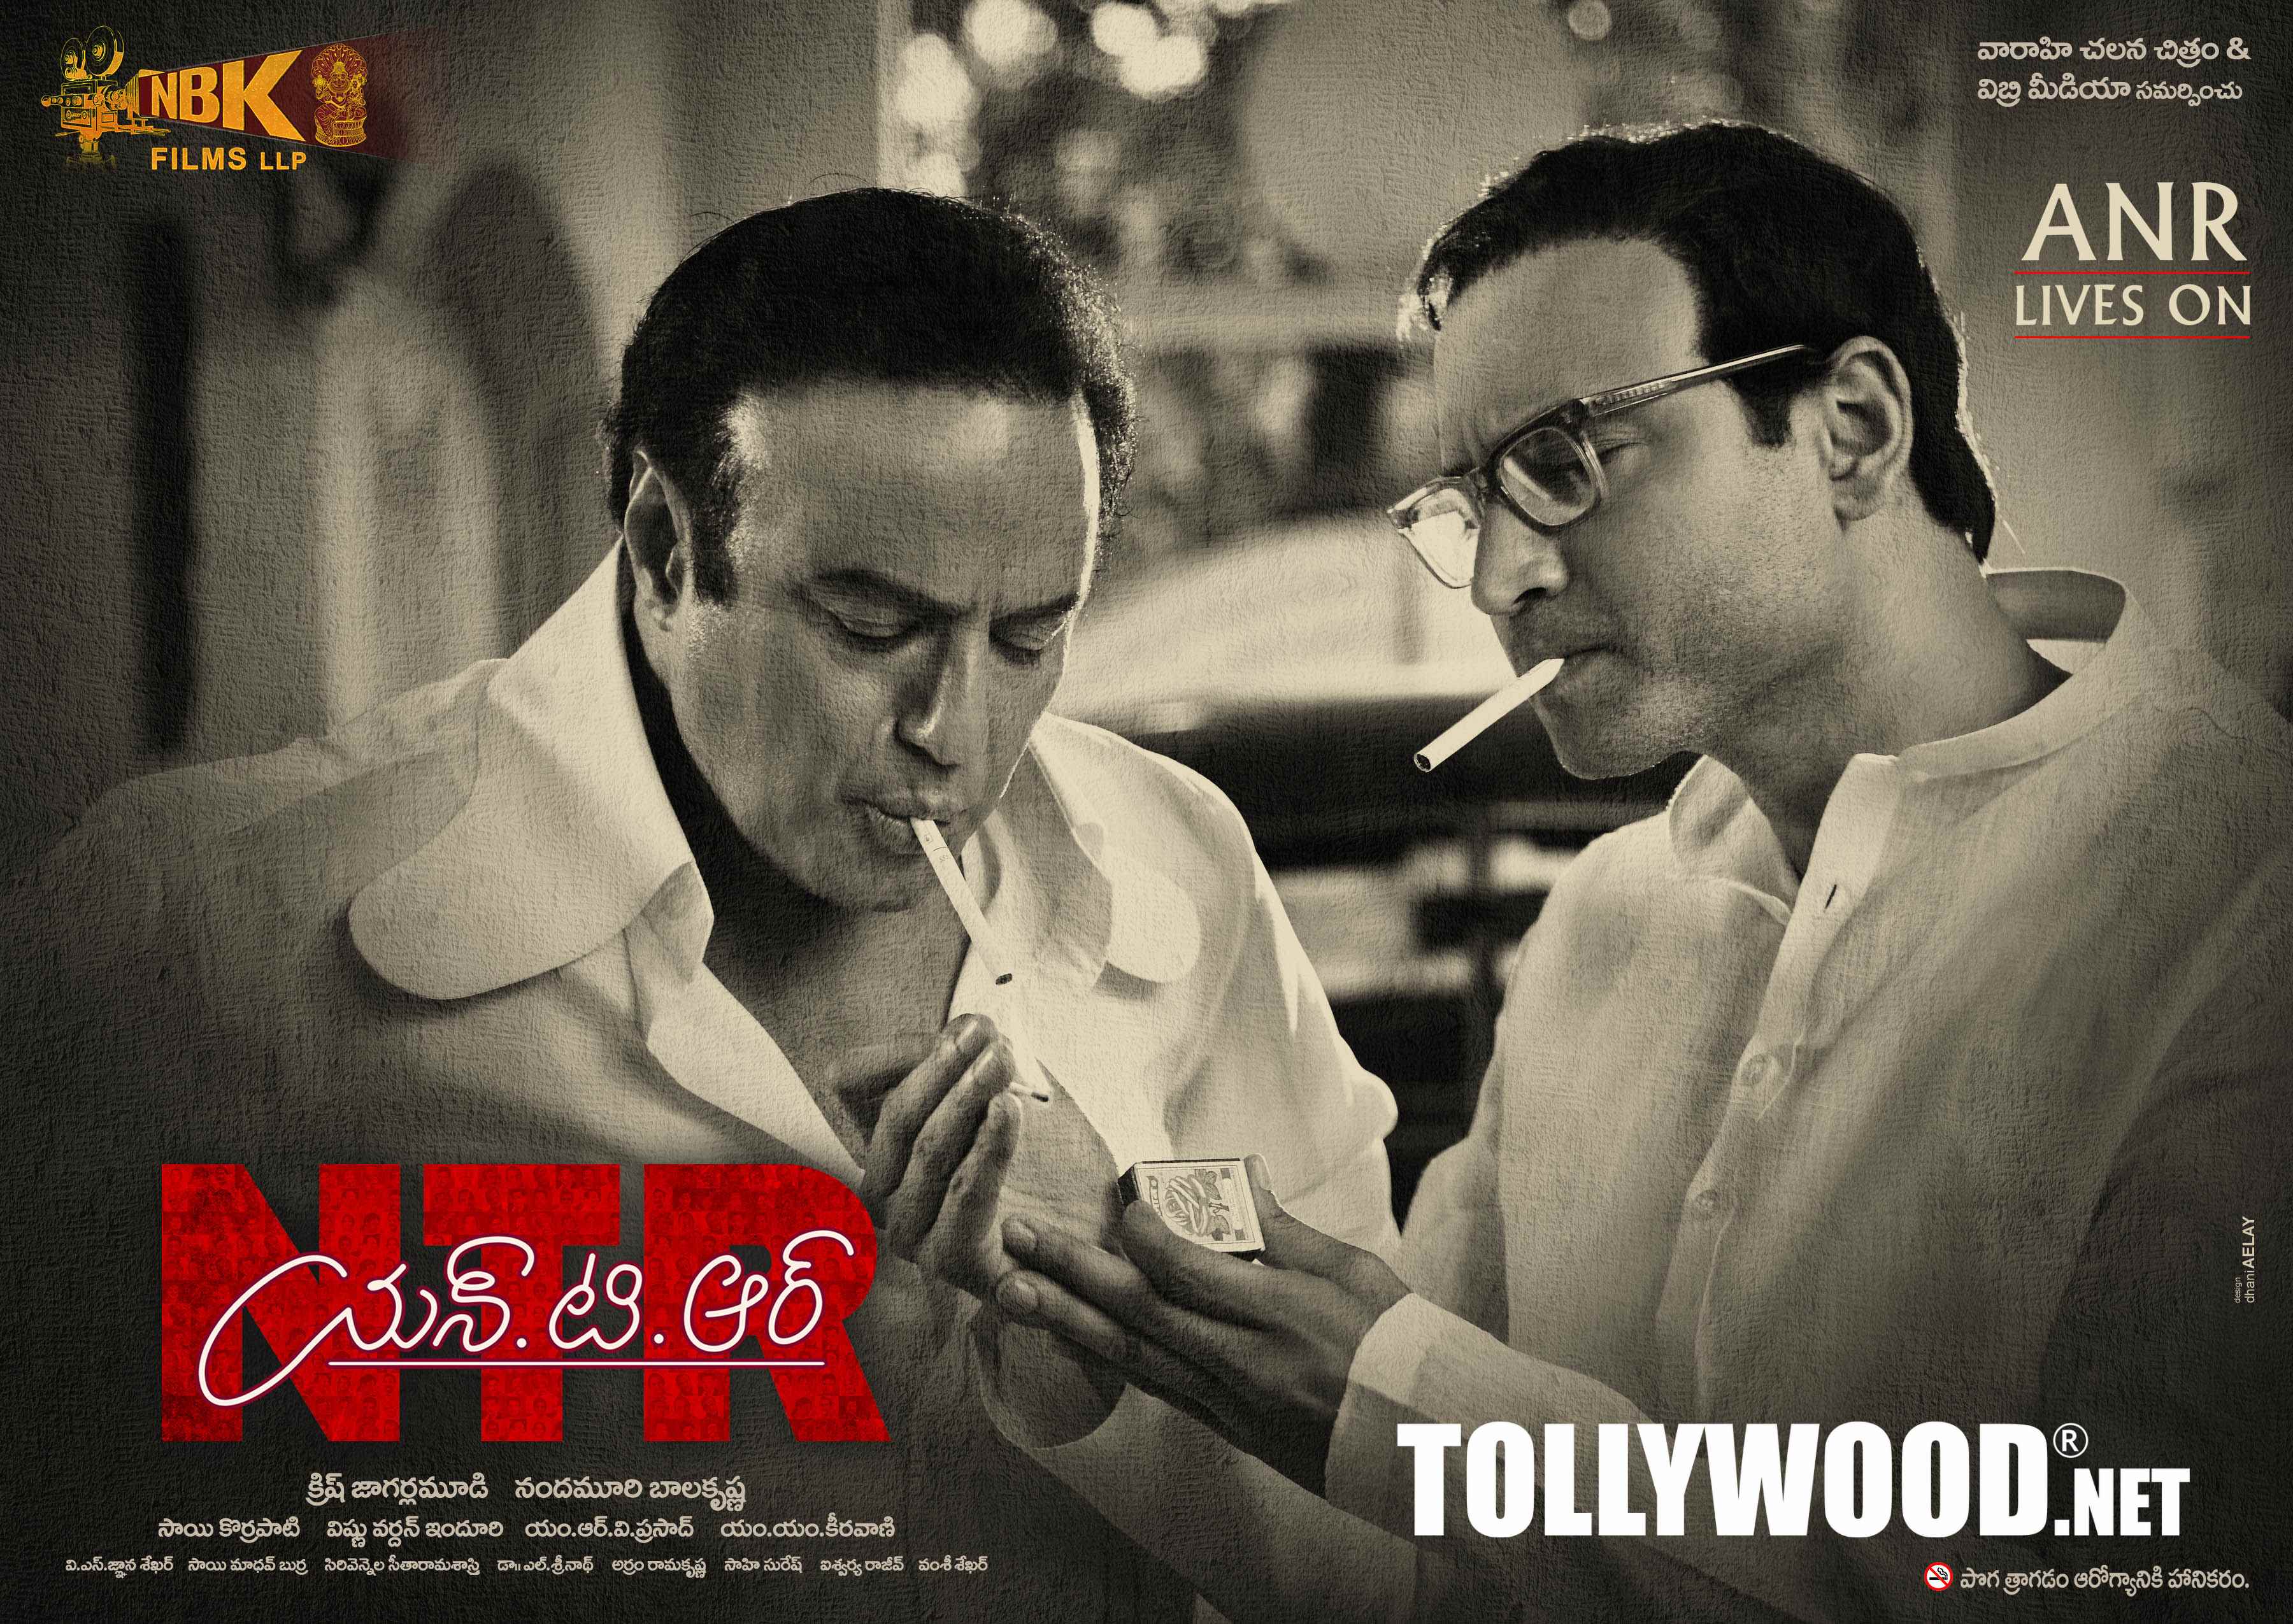 NTR and ANR From NTR Biopic